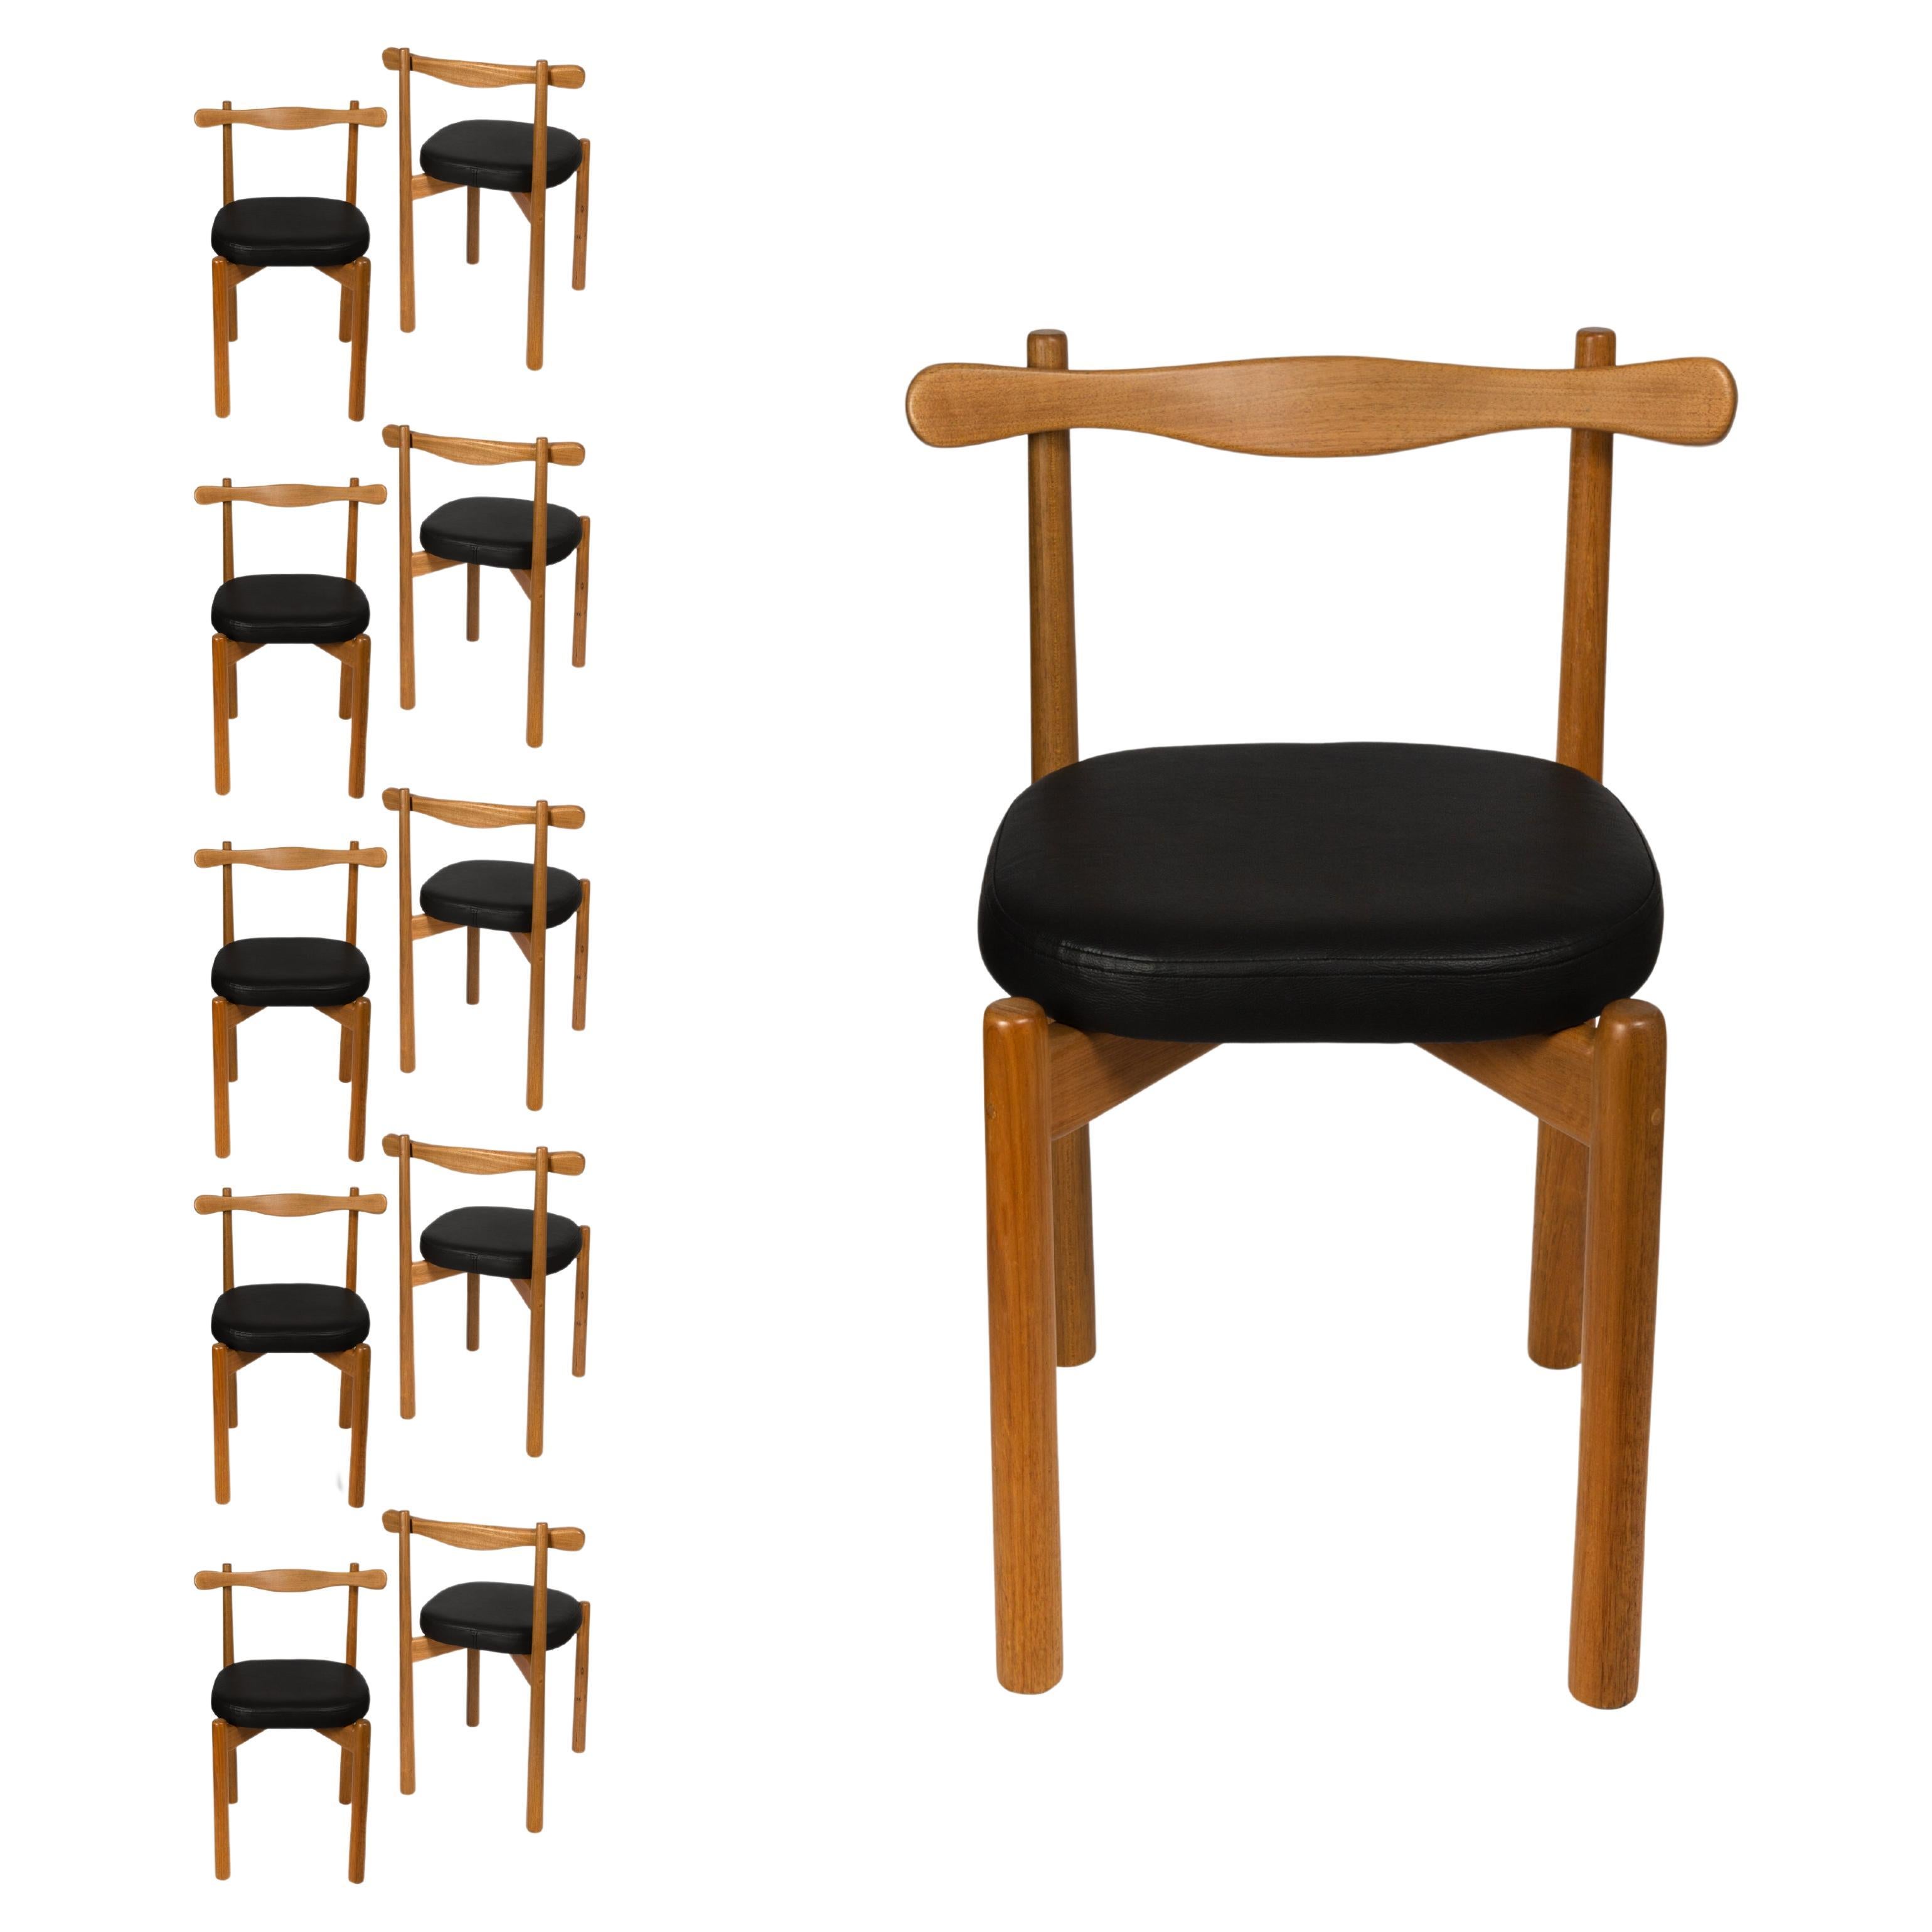 Set of 10 Dining Chairs Uçá Light Brown Wood (fabric ref : F07)